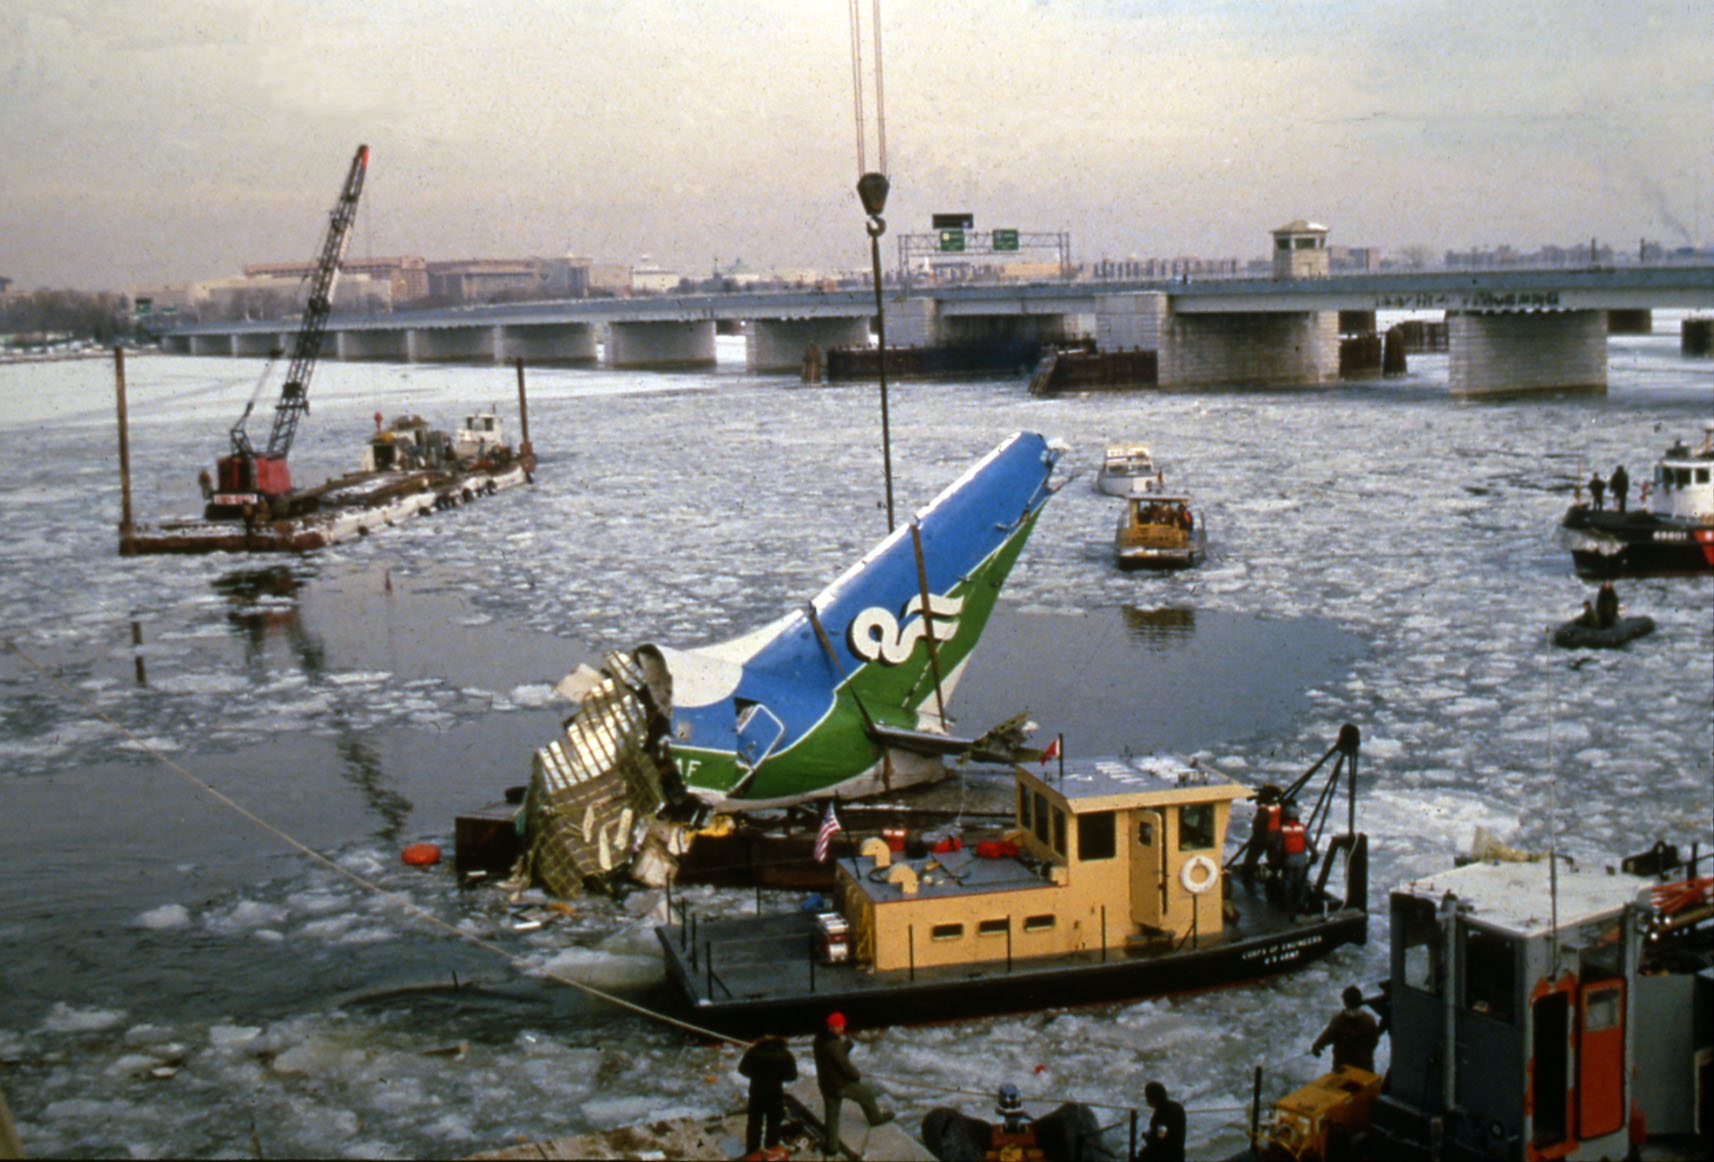 Boats and plane wreckage in icy river water